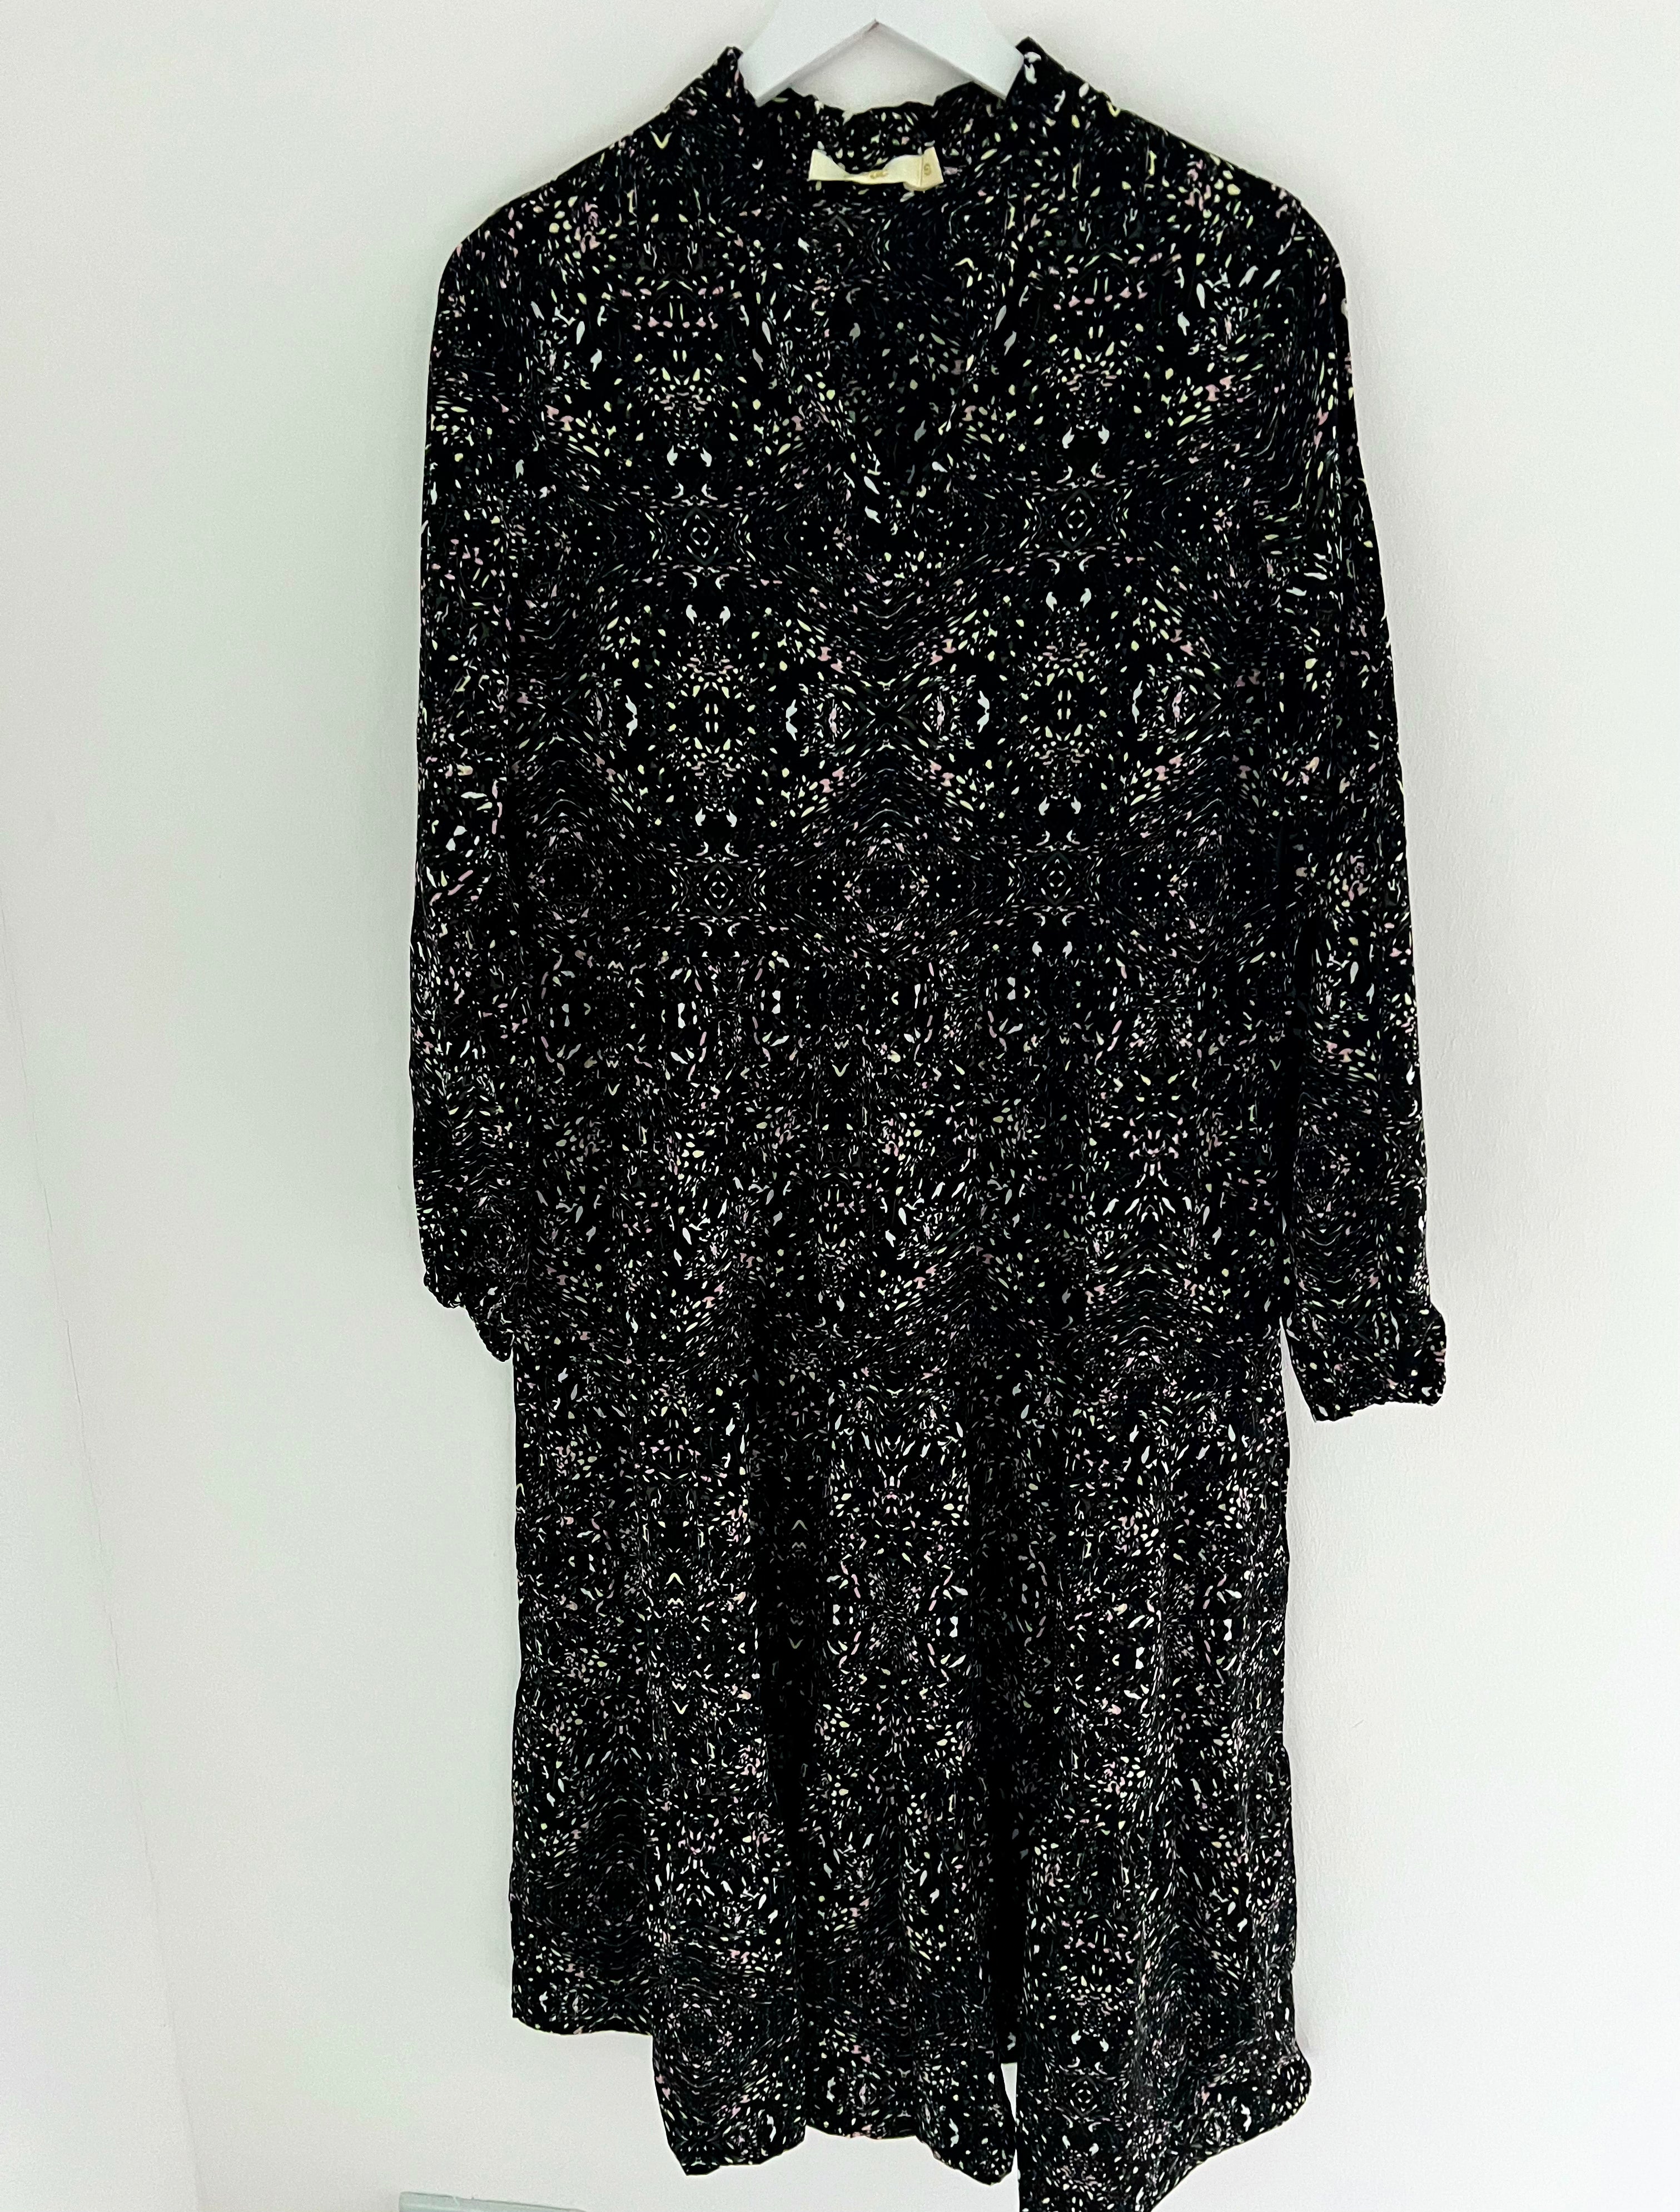 Tiered V Neck Mosaic Print Dress in Black